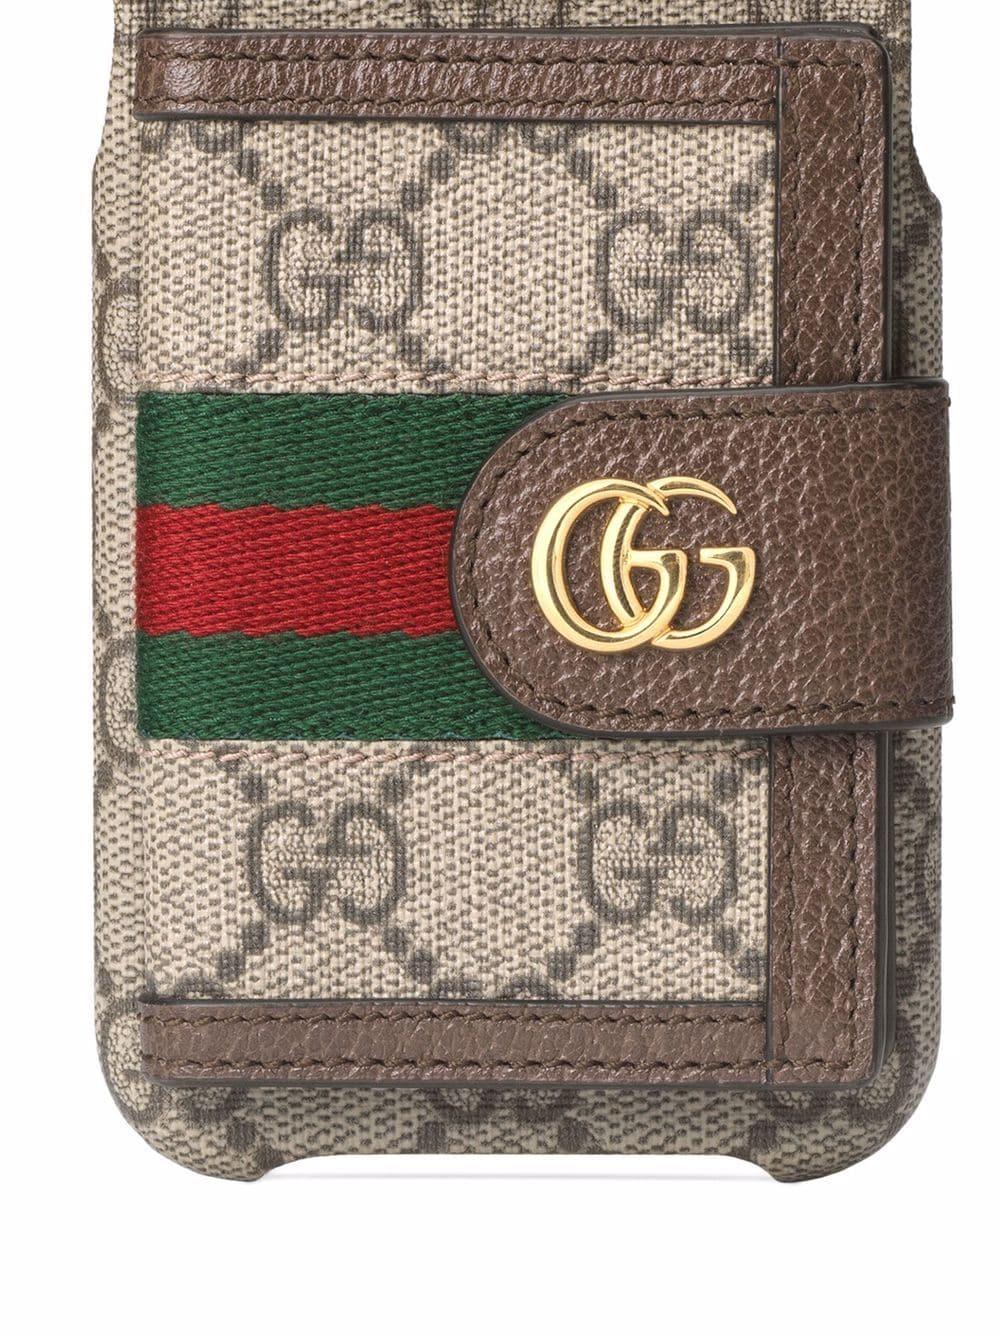 Ophidia Airpods Pro Case In GG Supreme Canvas